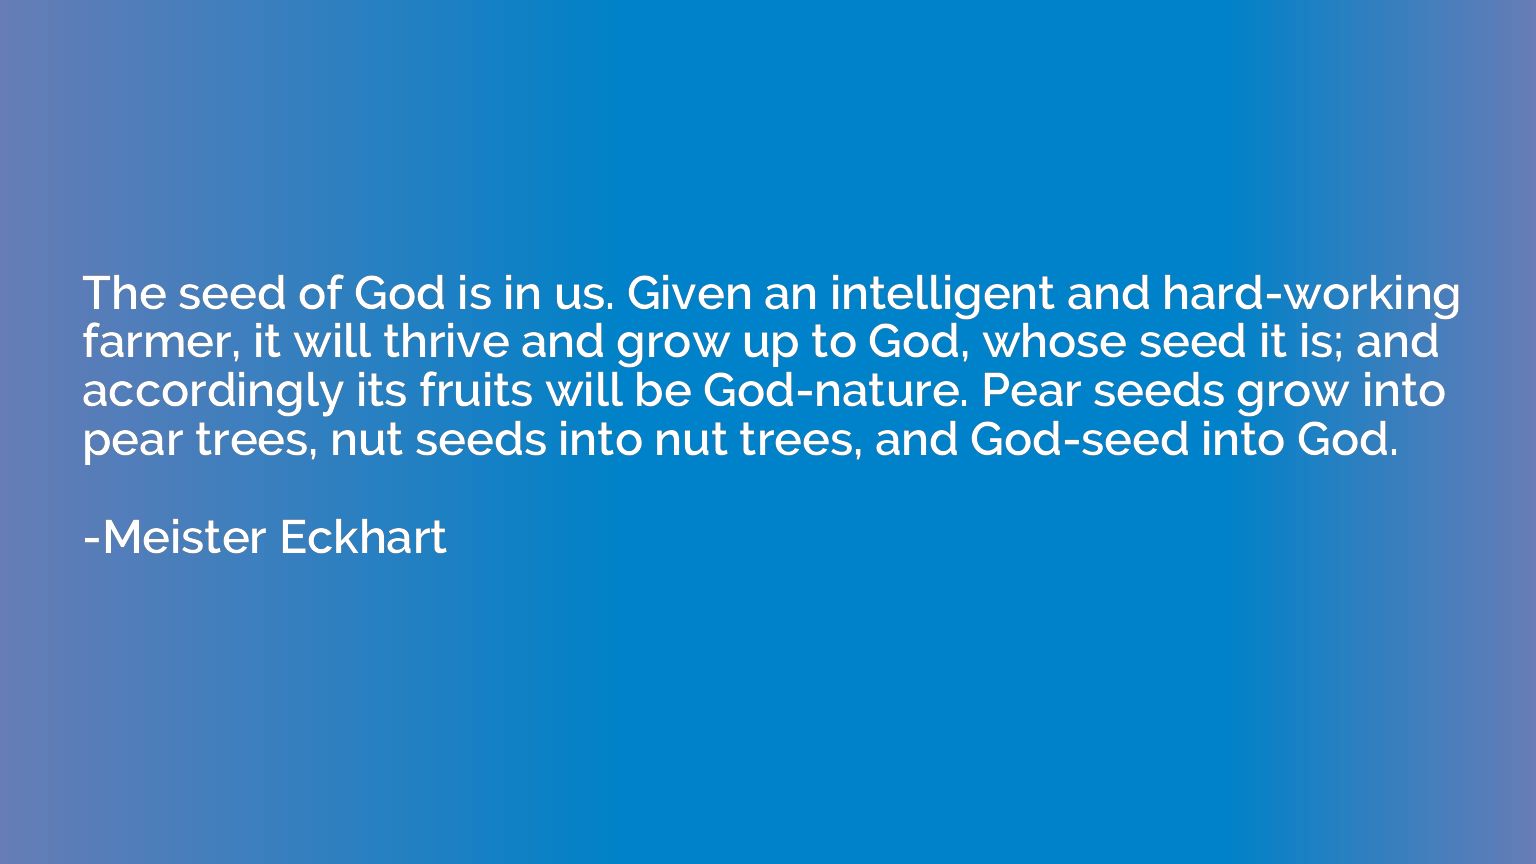 The seed of God is in us. Given an intelligent and hard-work